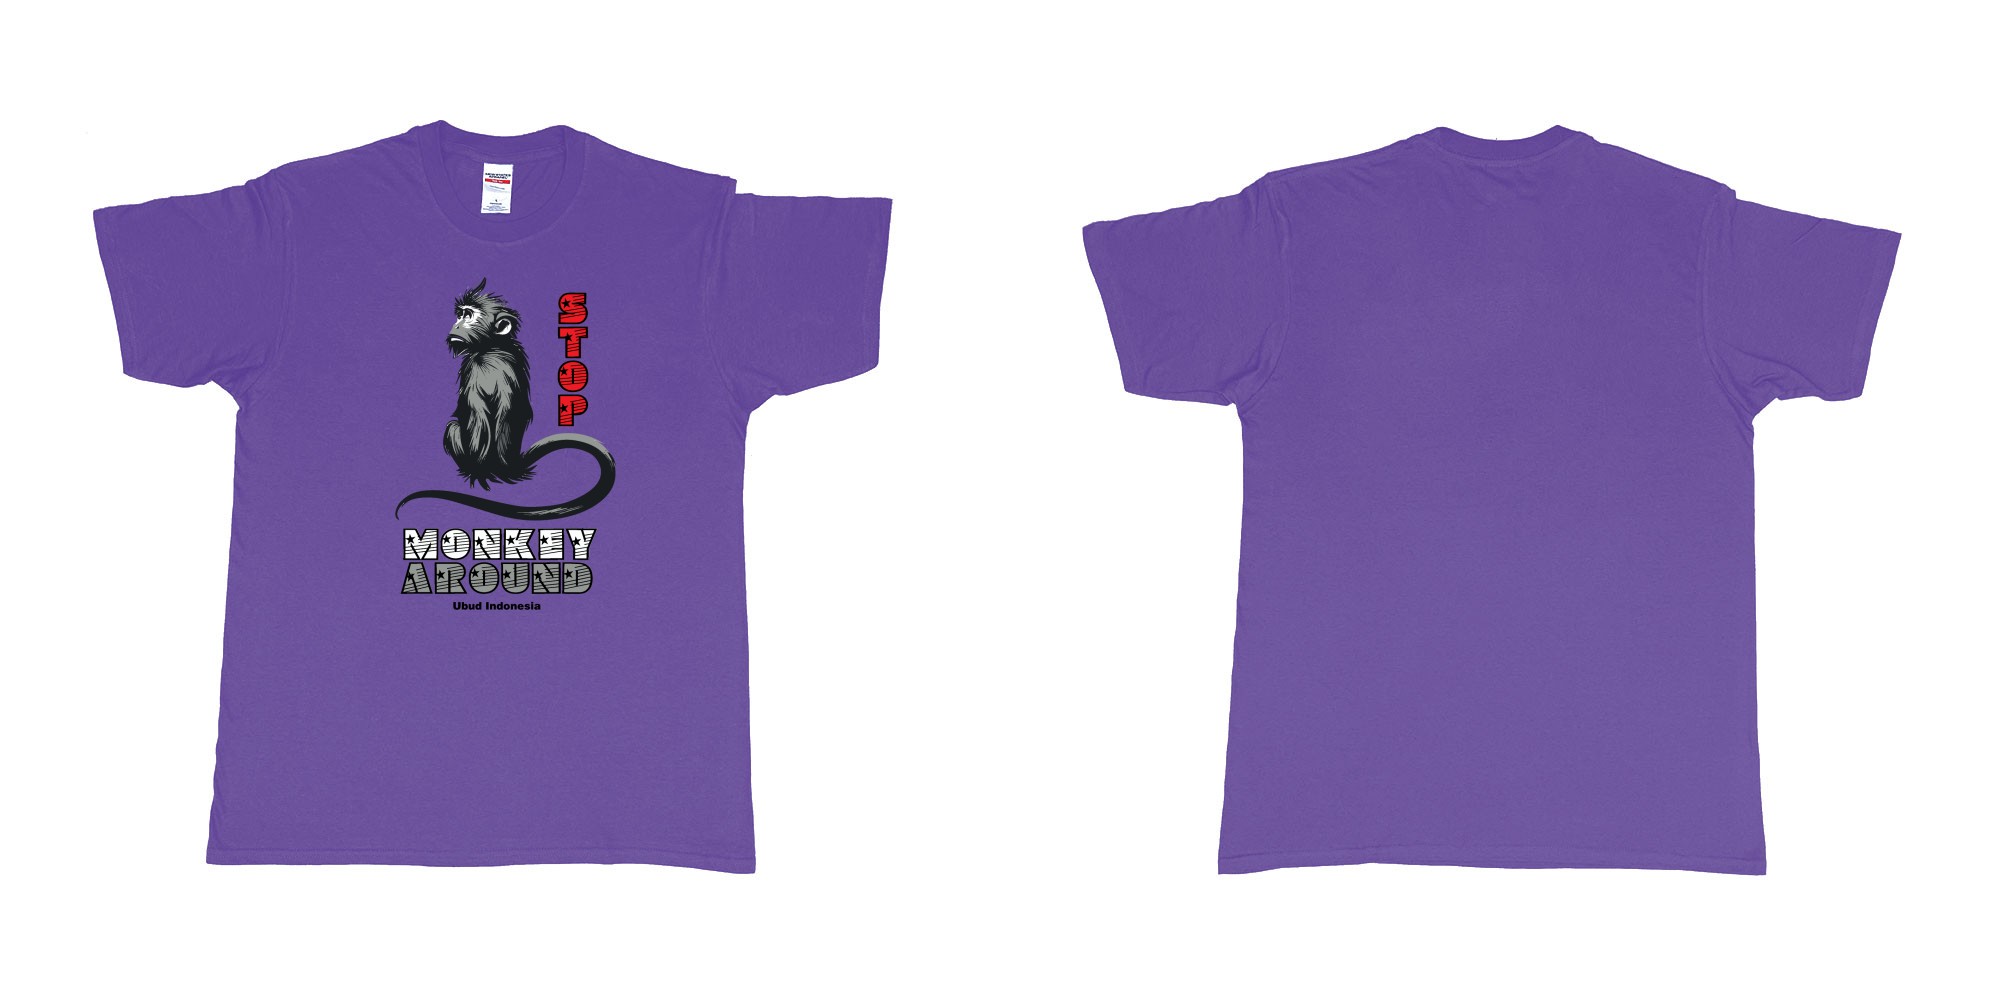 Custom tshirt design stop monkey around long tailed macaque ubud bali monkey forest in fabric color purple choice your own text made in Bali by The Pirate Way